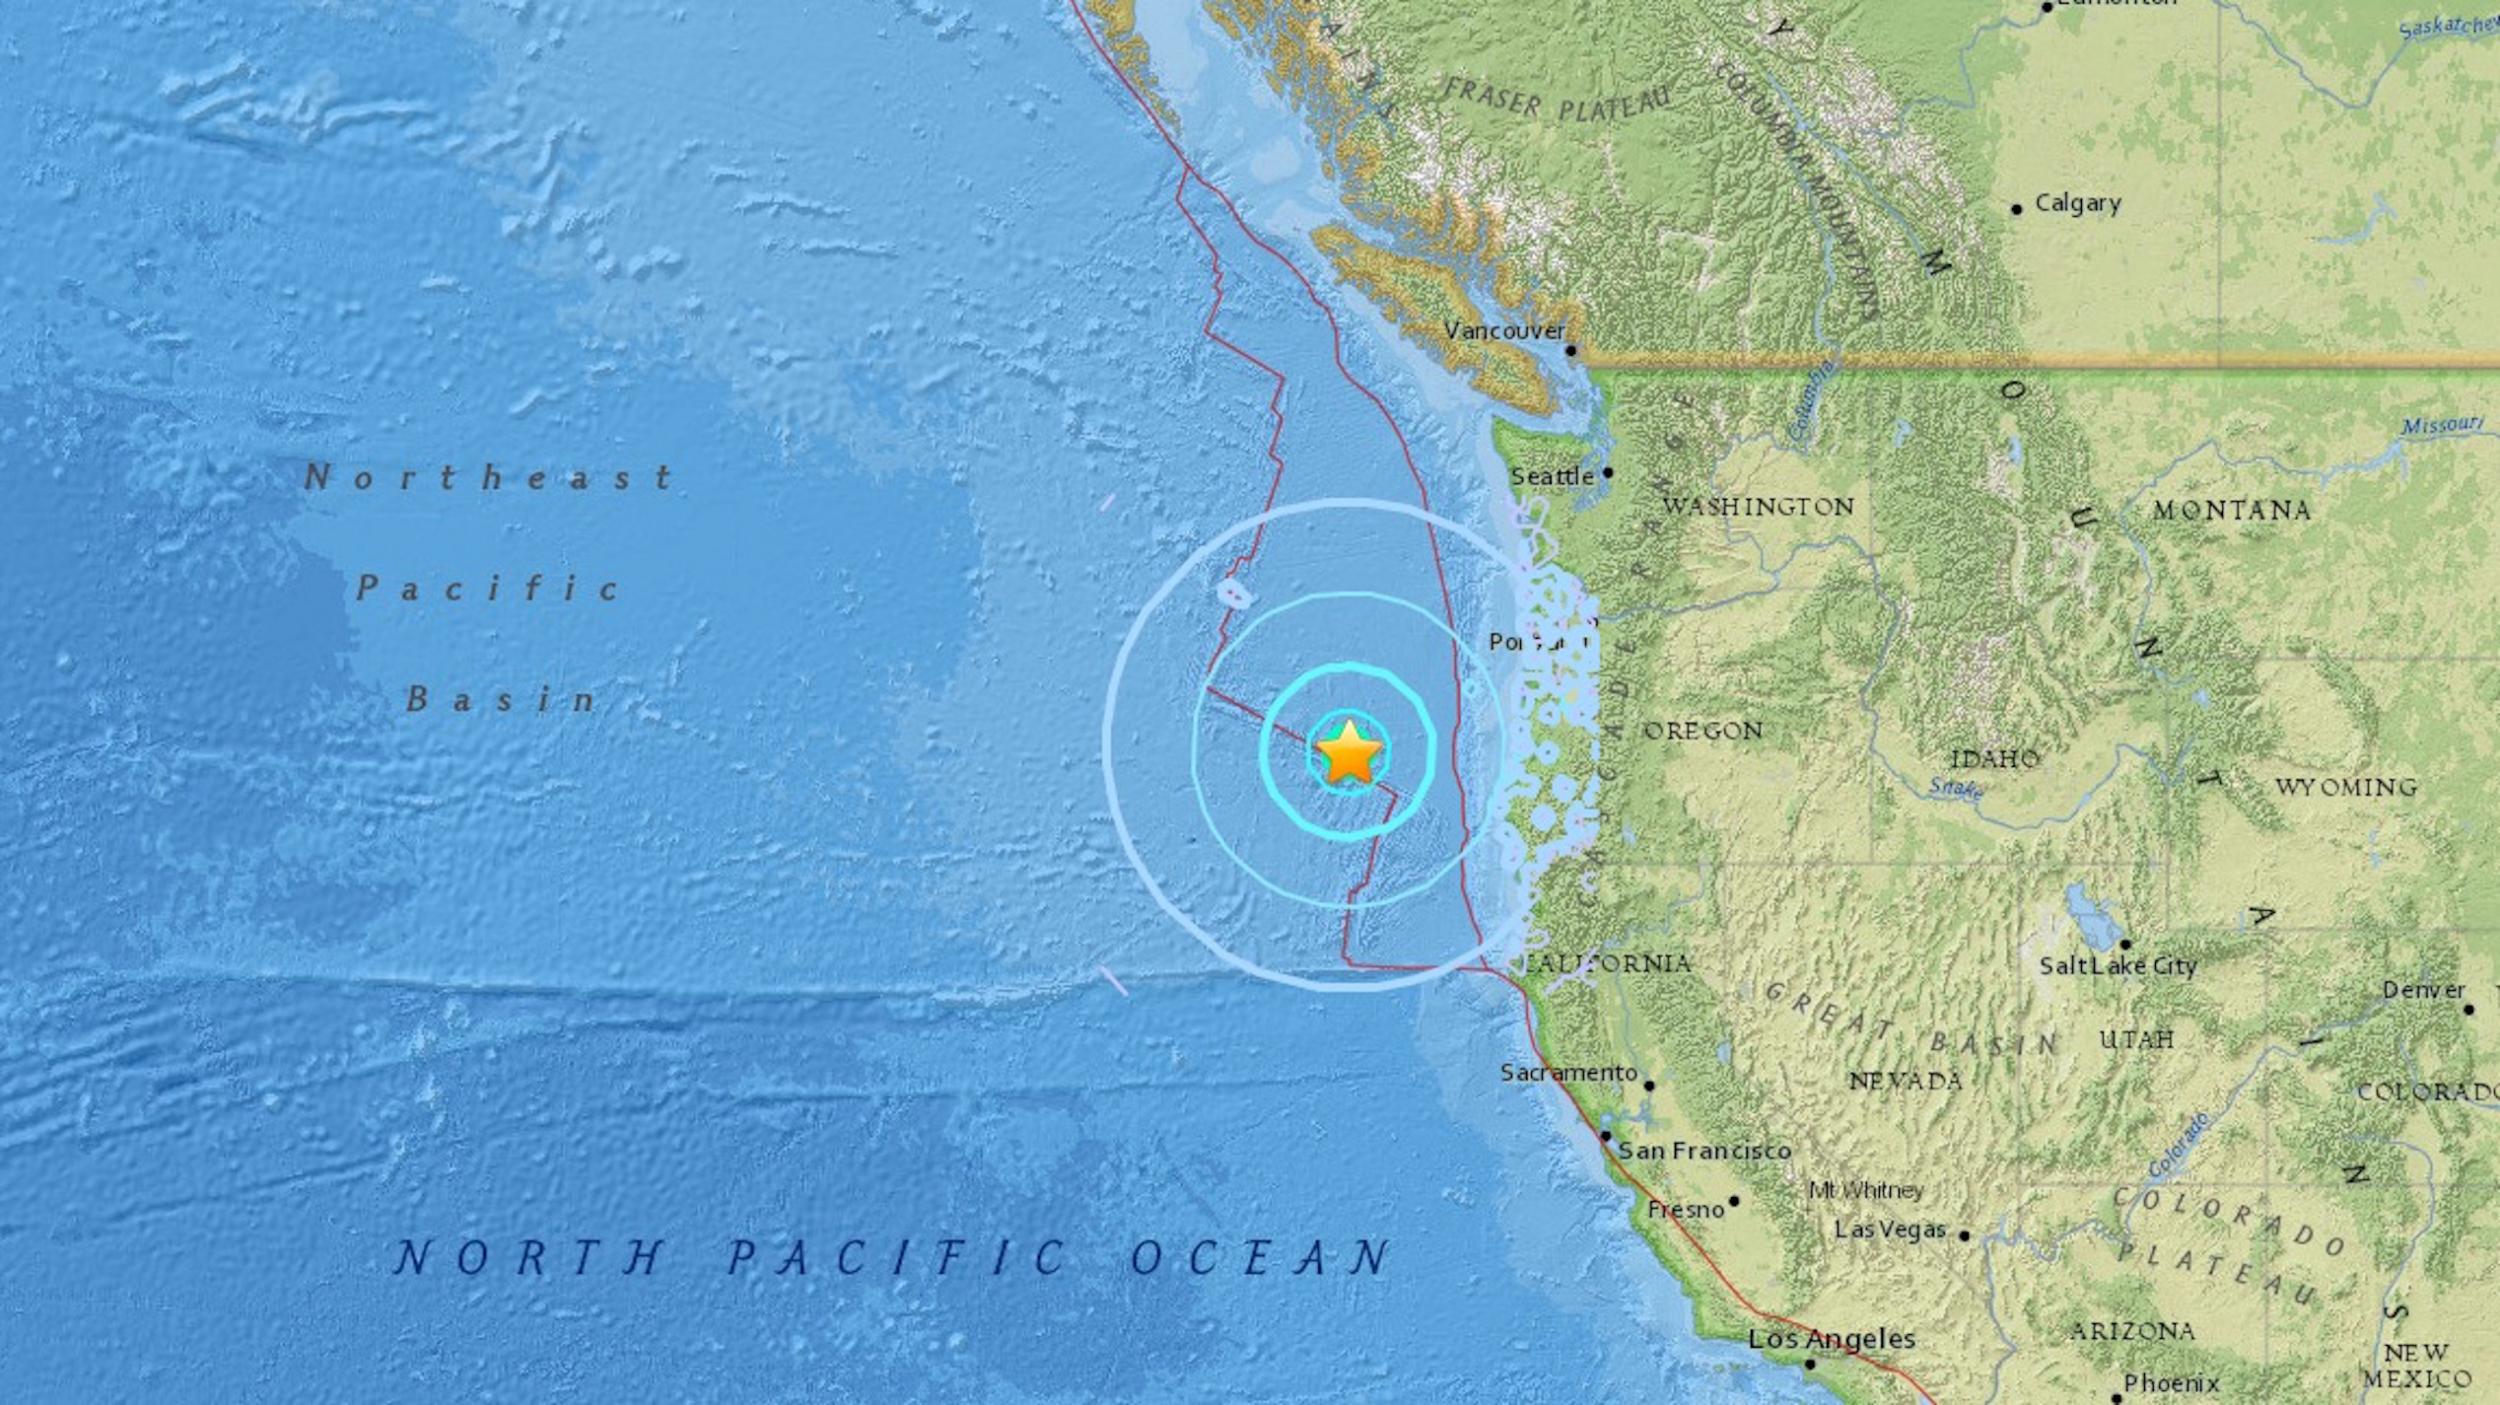 A still from an interactive map provided by The United States Geological Survey shows where the 6.2 magnitude earthquake occurred off the coast of Oregon 22 August 2018